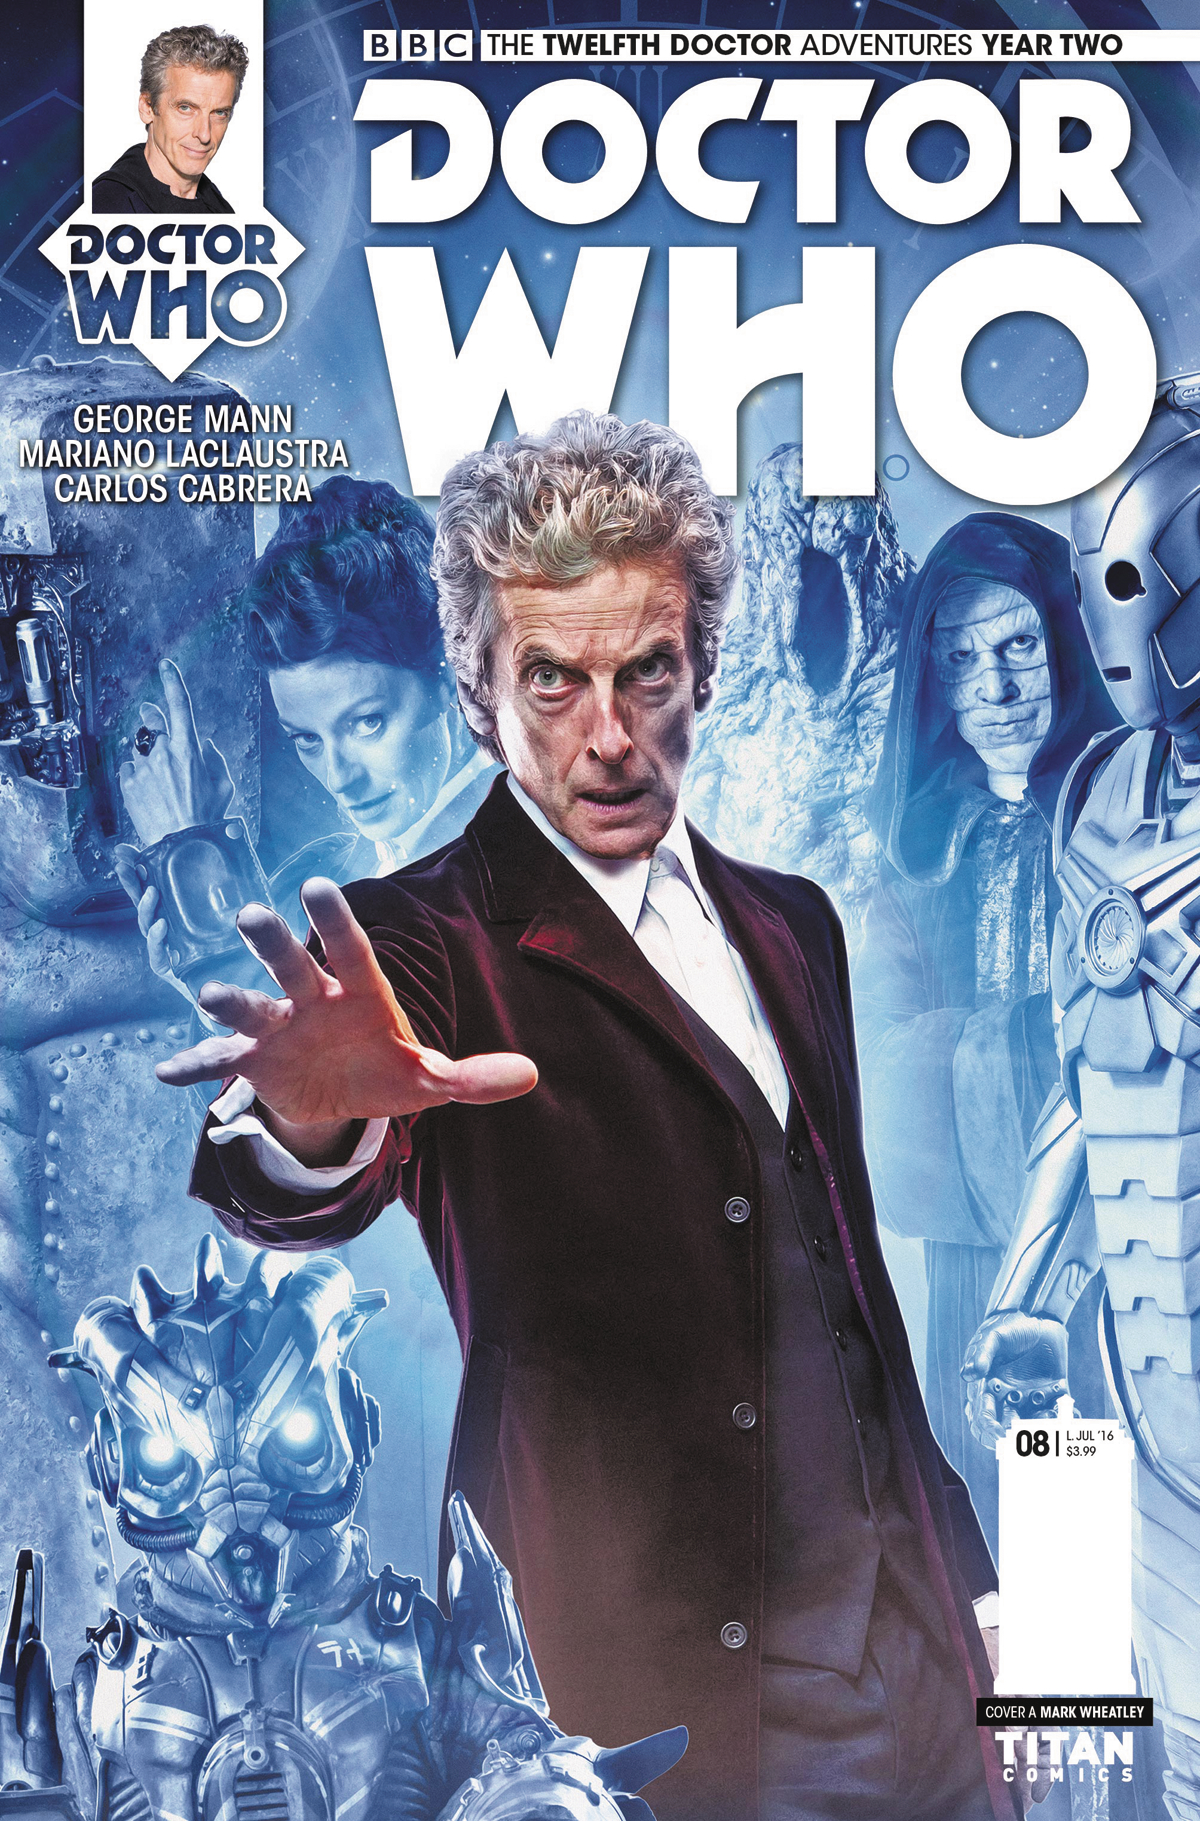 DOCTOR WHO 12TH YEAR TWO #8 CVR B PHOTO